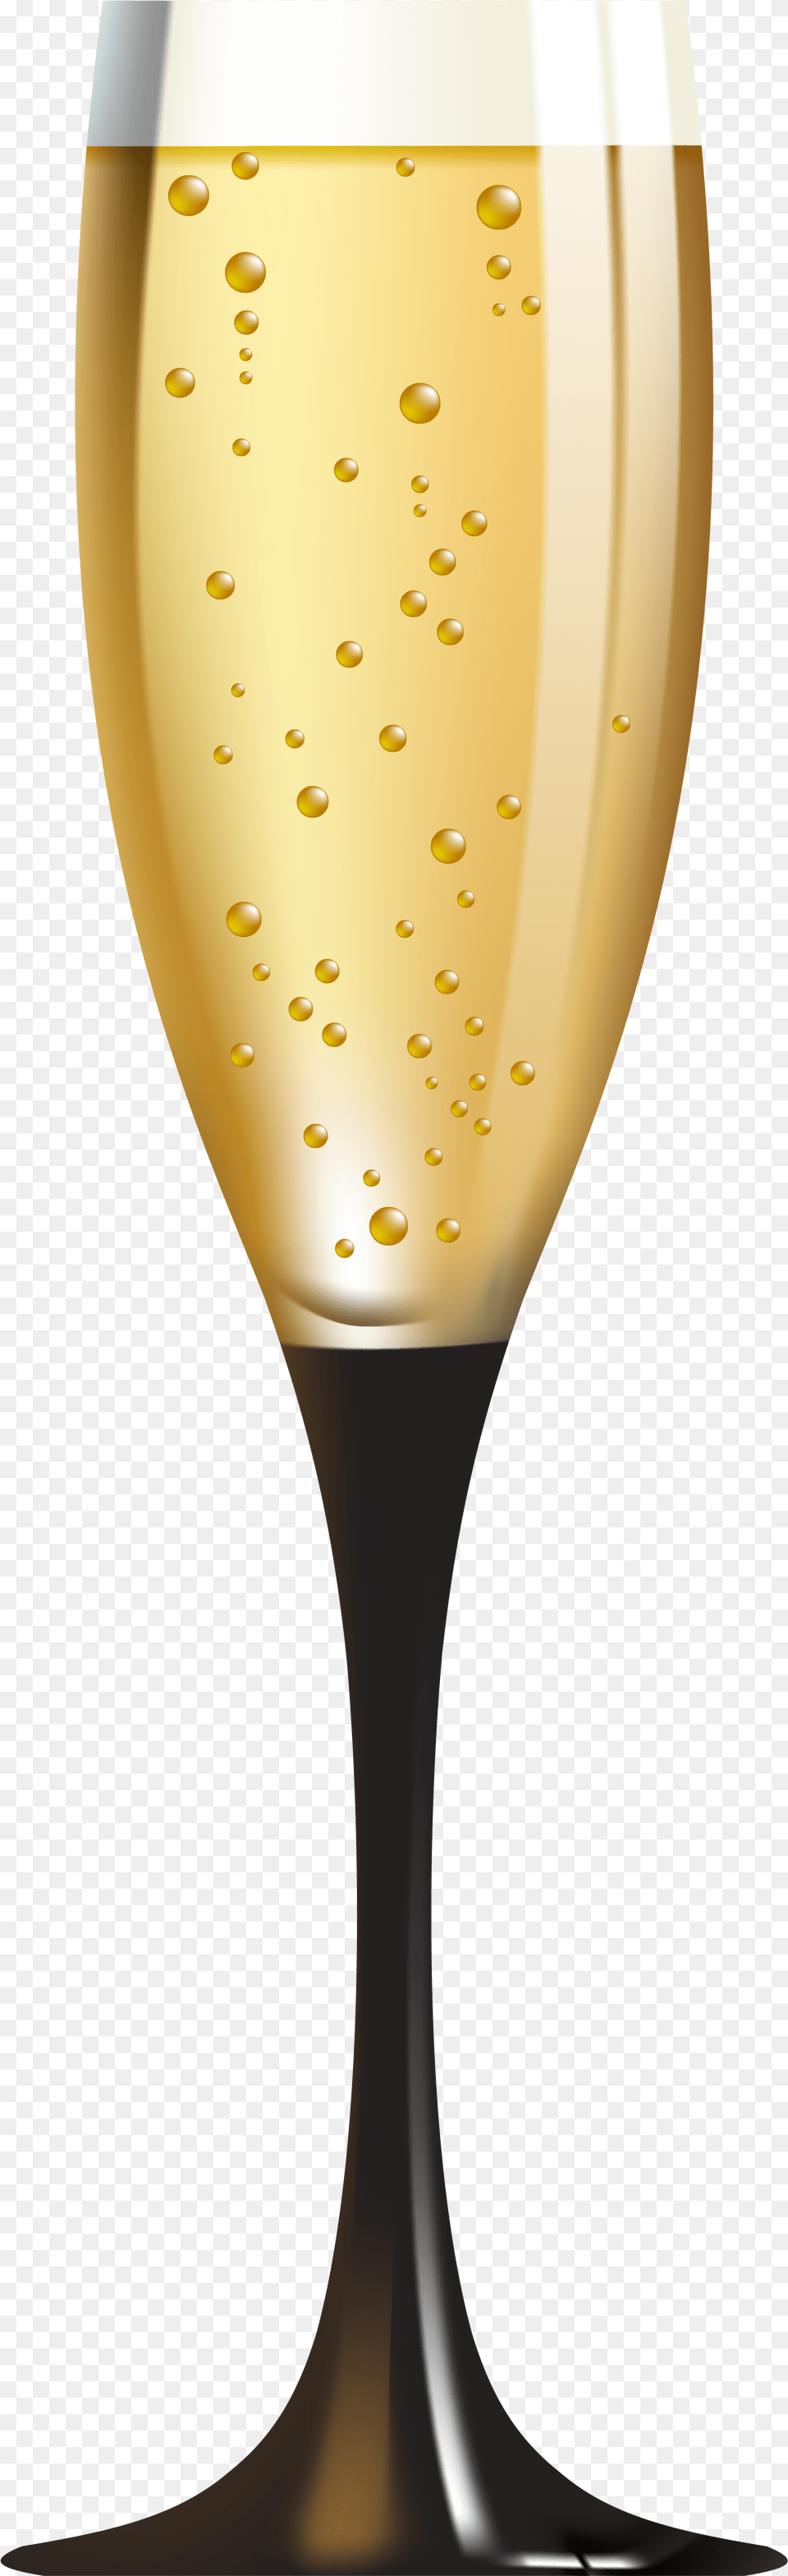 Champagne Transparent Background Champagne Glass Clipart, Alcohol, Beverage, Liquor, Wine Png Image